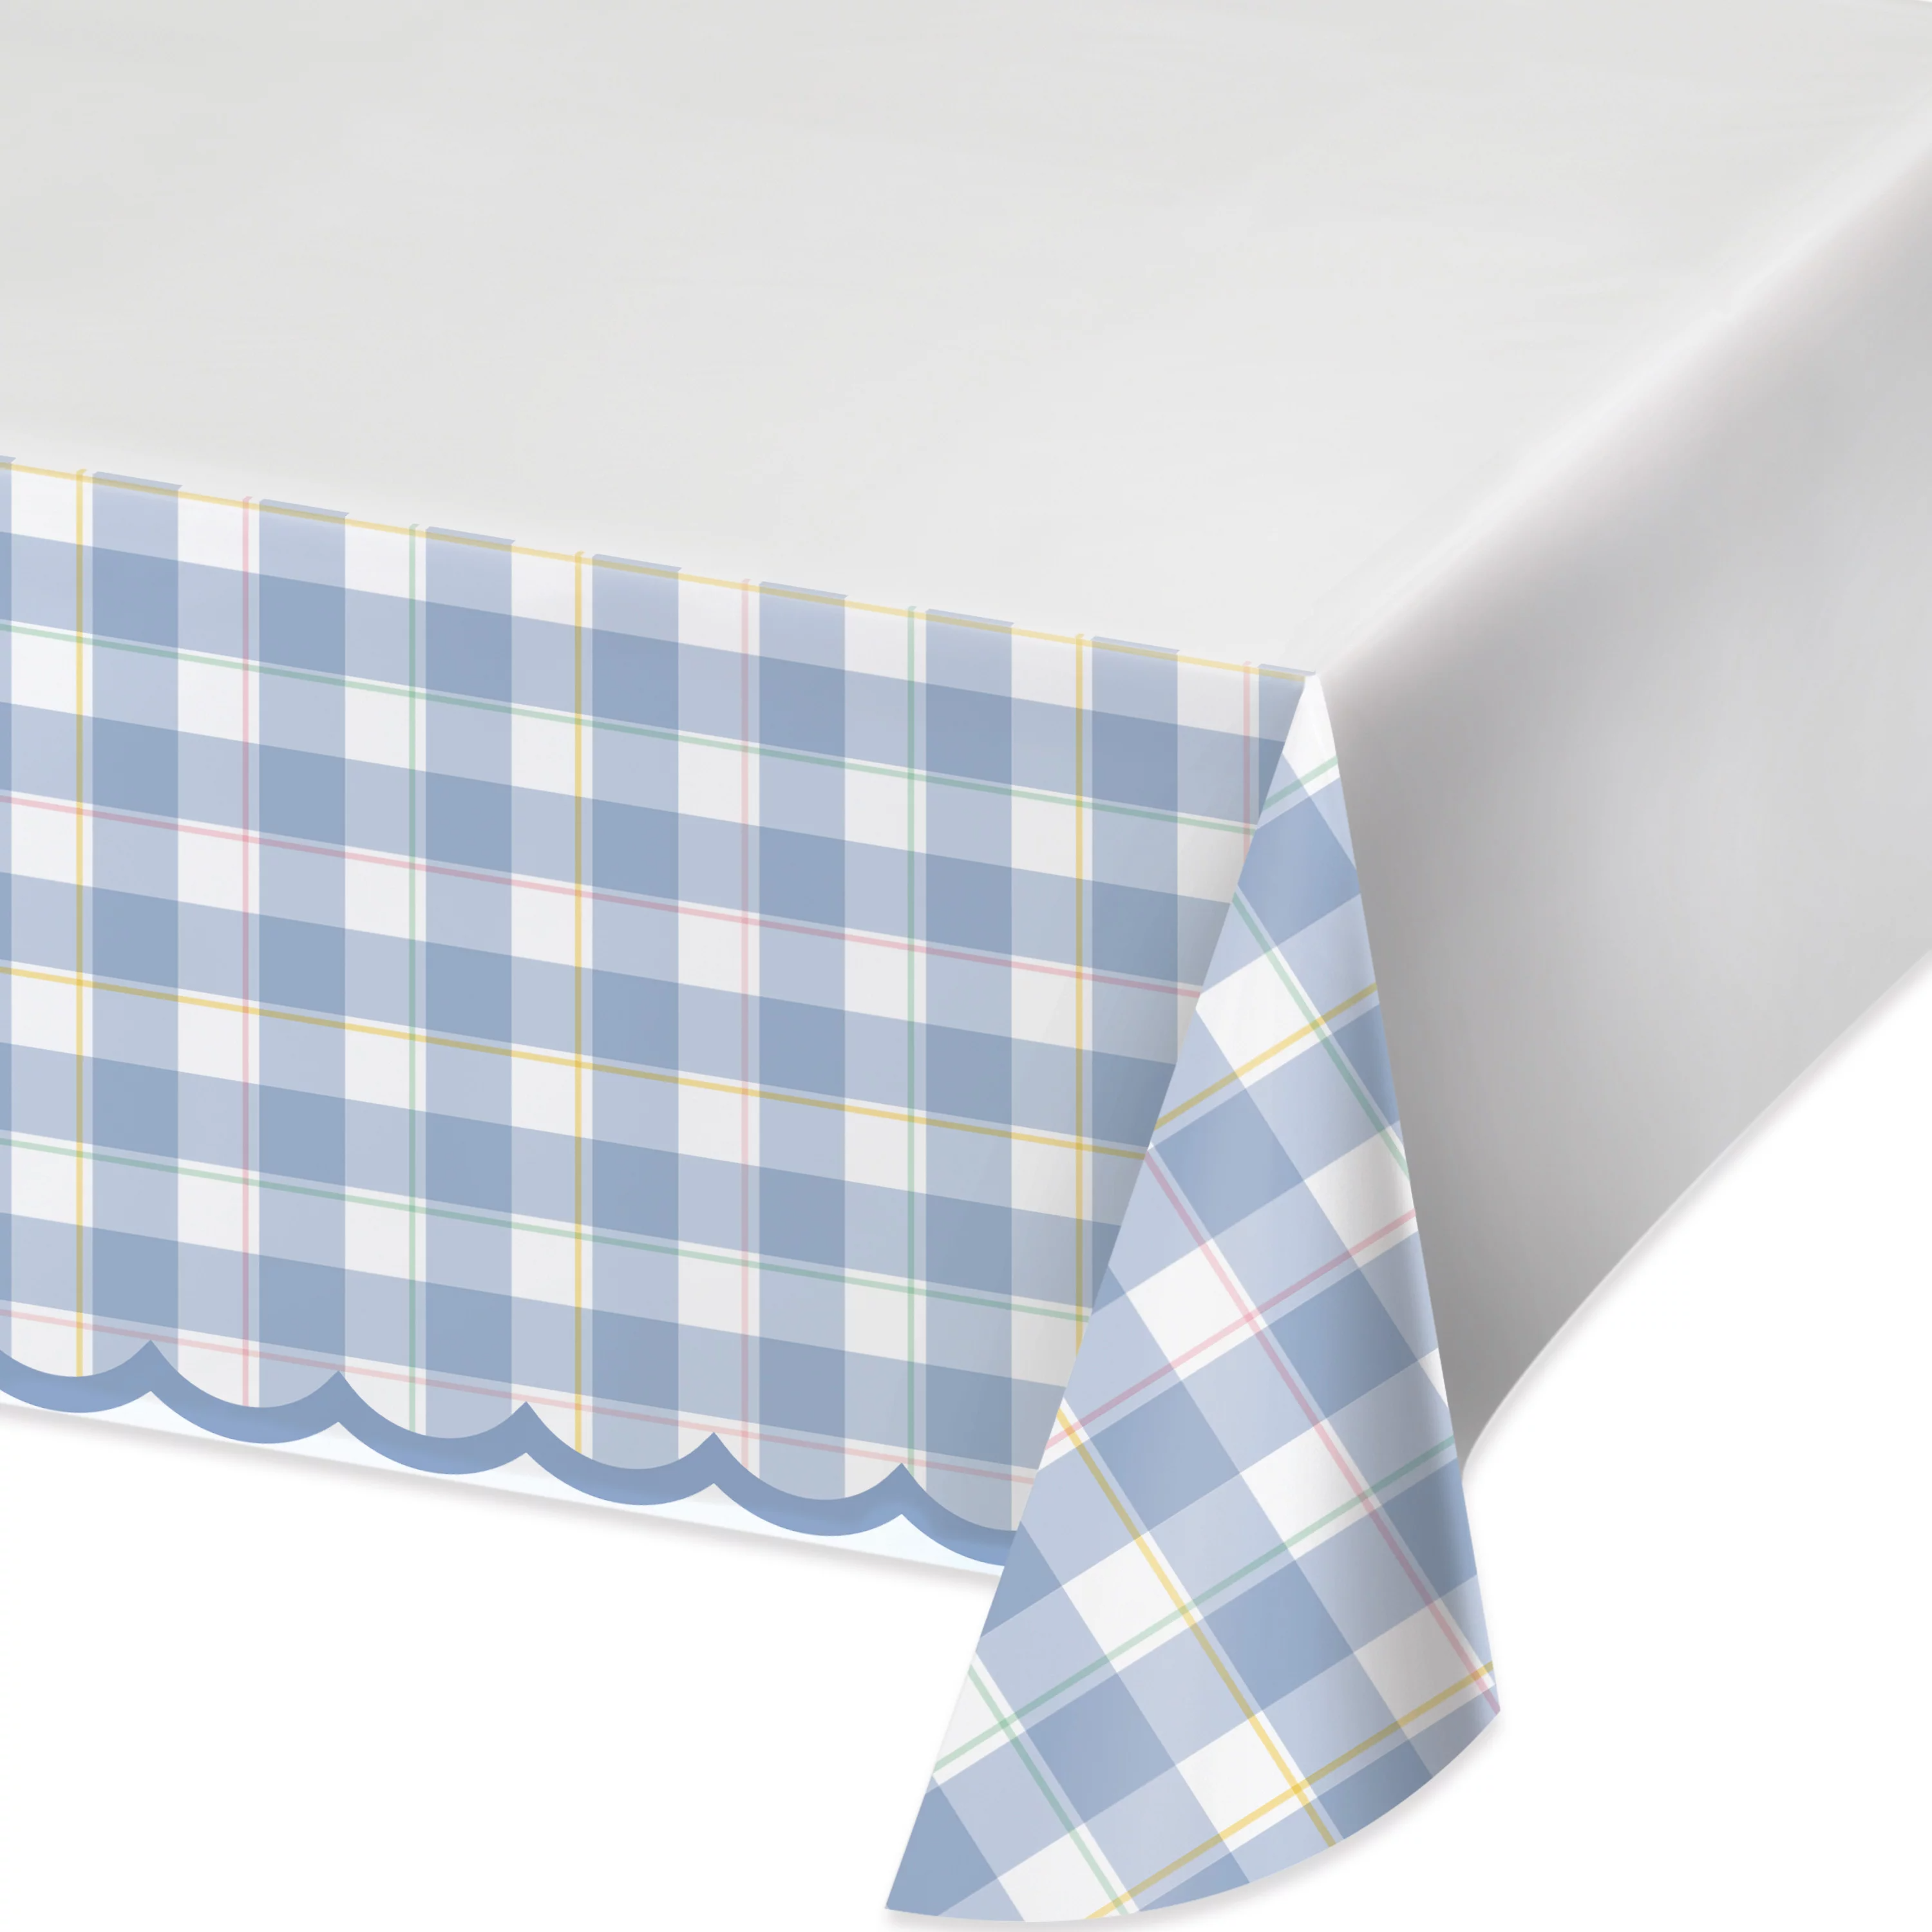 A close-up of the tablecloth